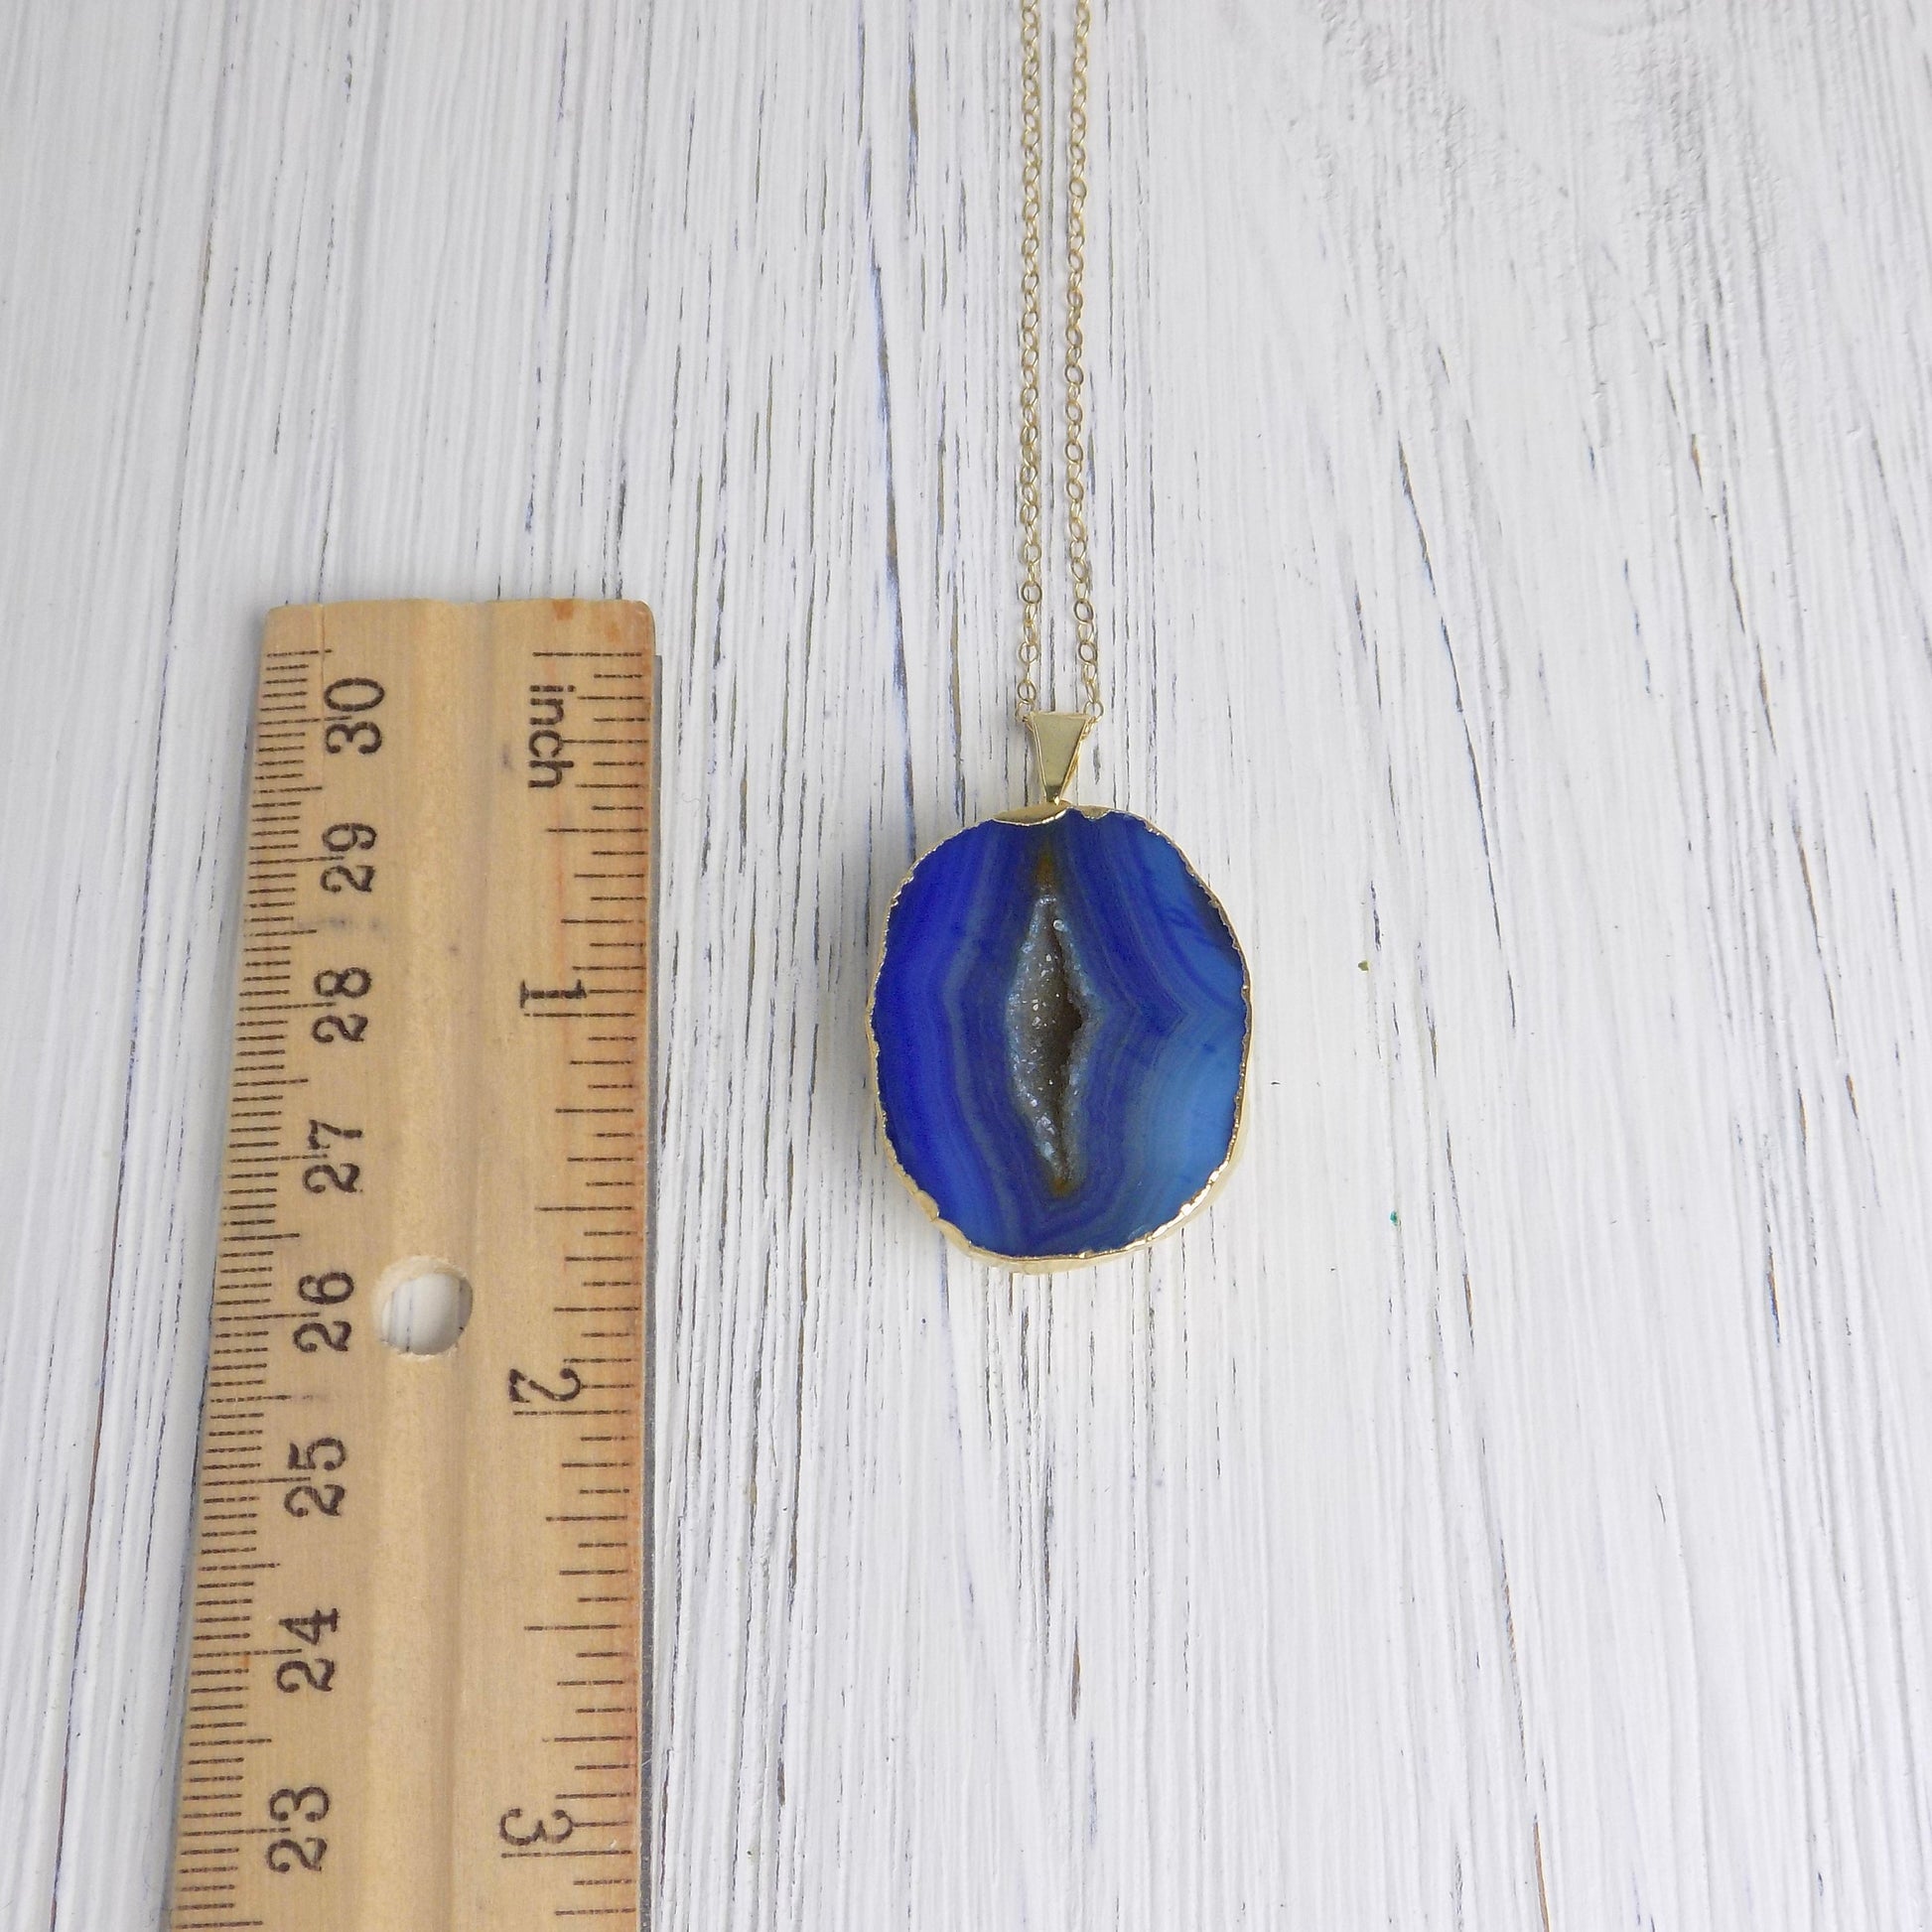 Gift Women, Geode Necklace, Blue Druzy Necklace, Slice Agate Necklace, Gemstone Necklace, Boho Necklace, Gold Layer, Stone Necklace G14-732